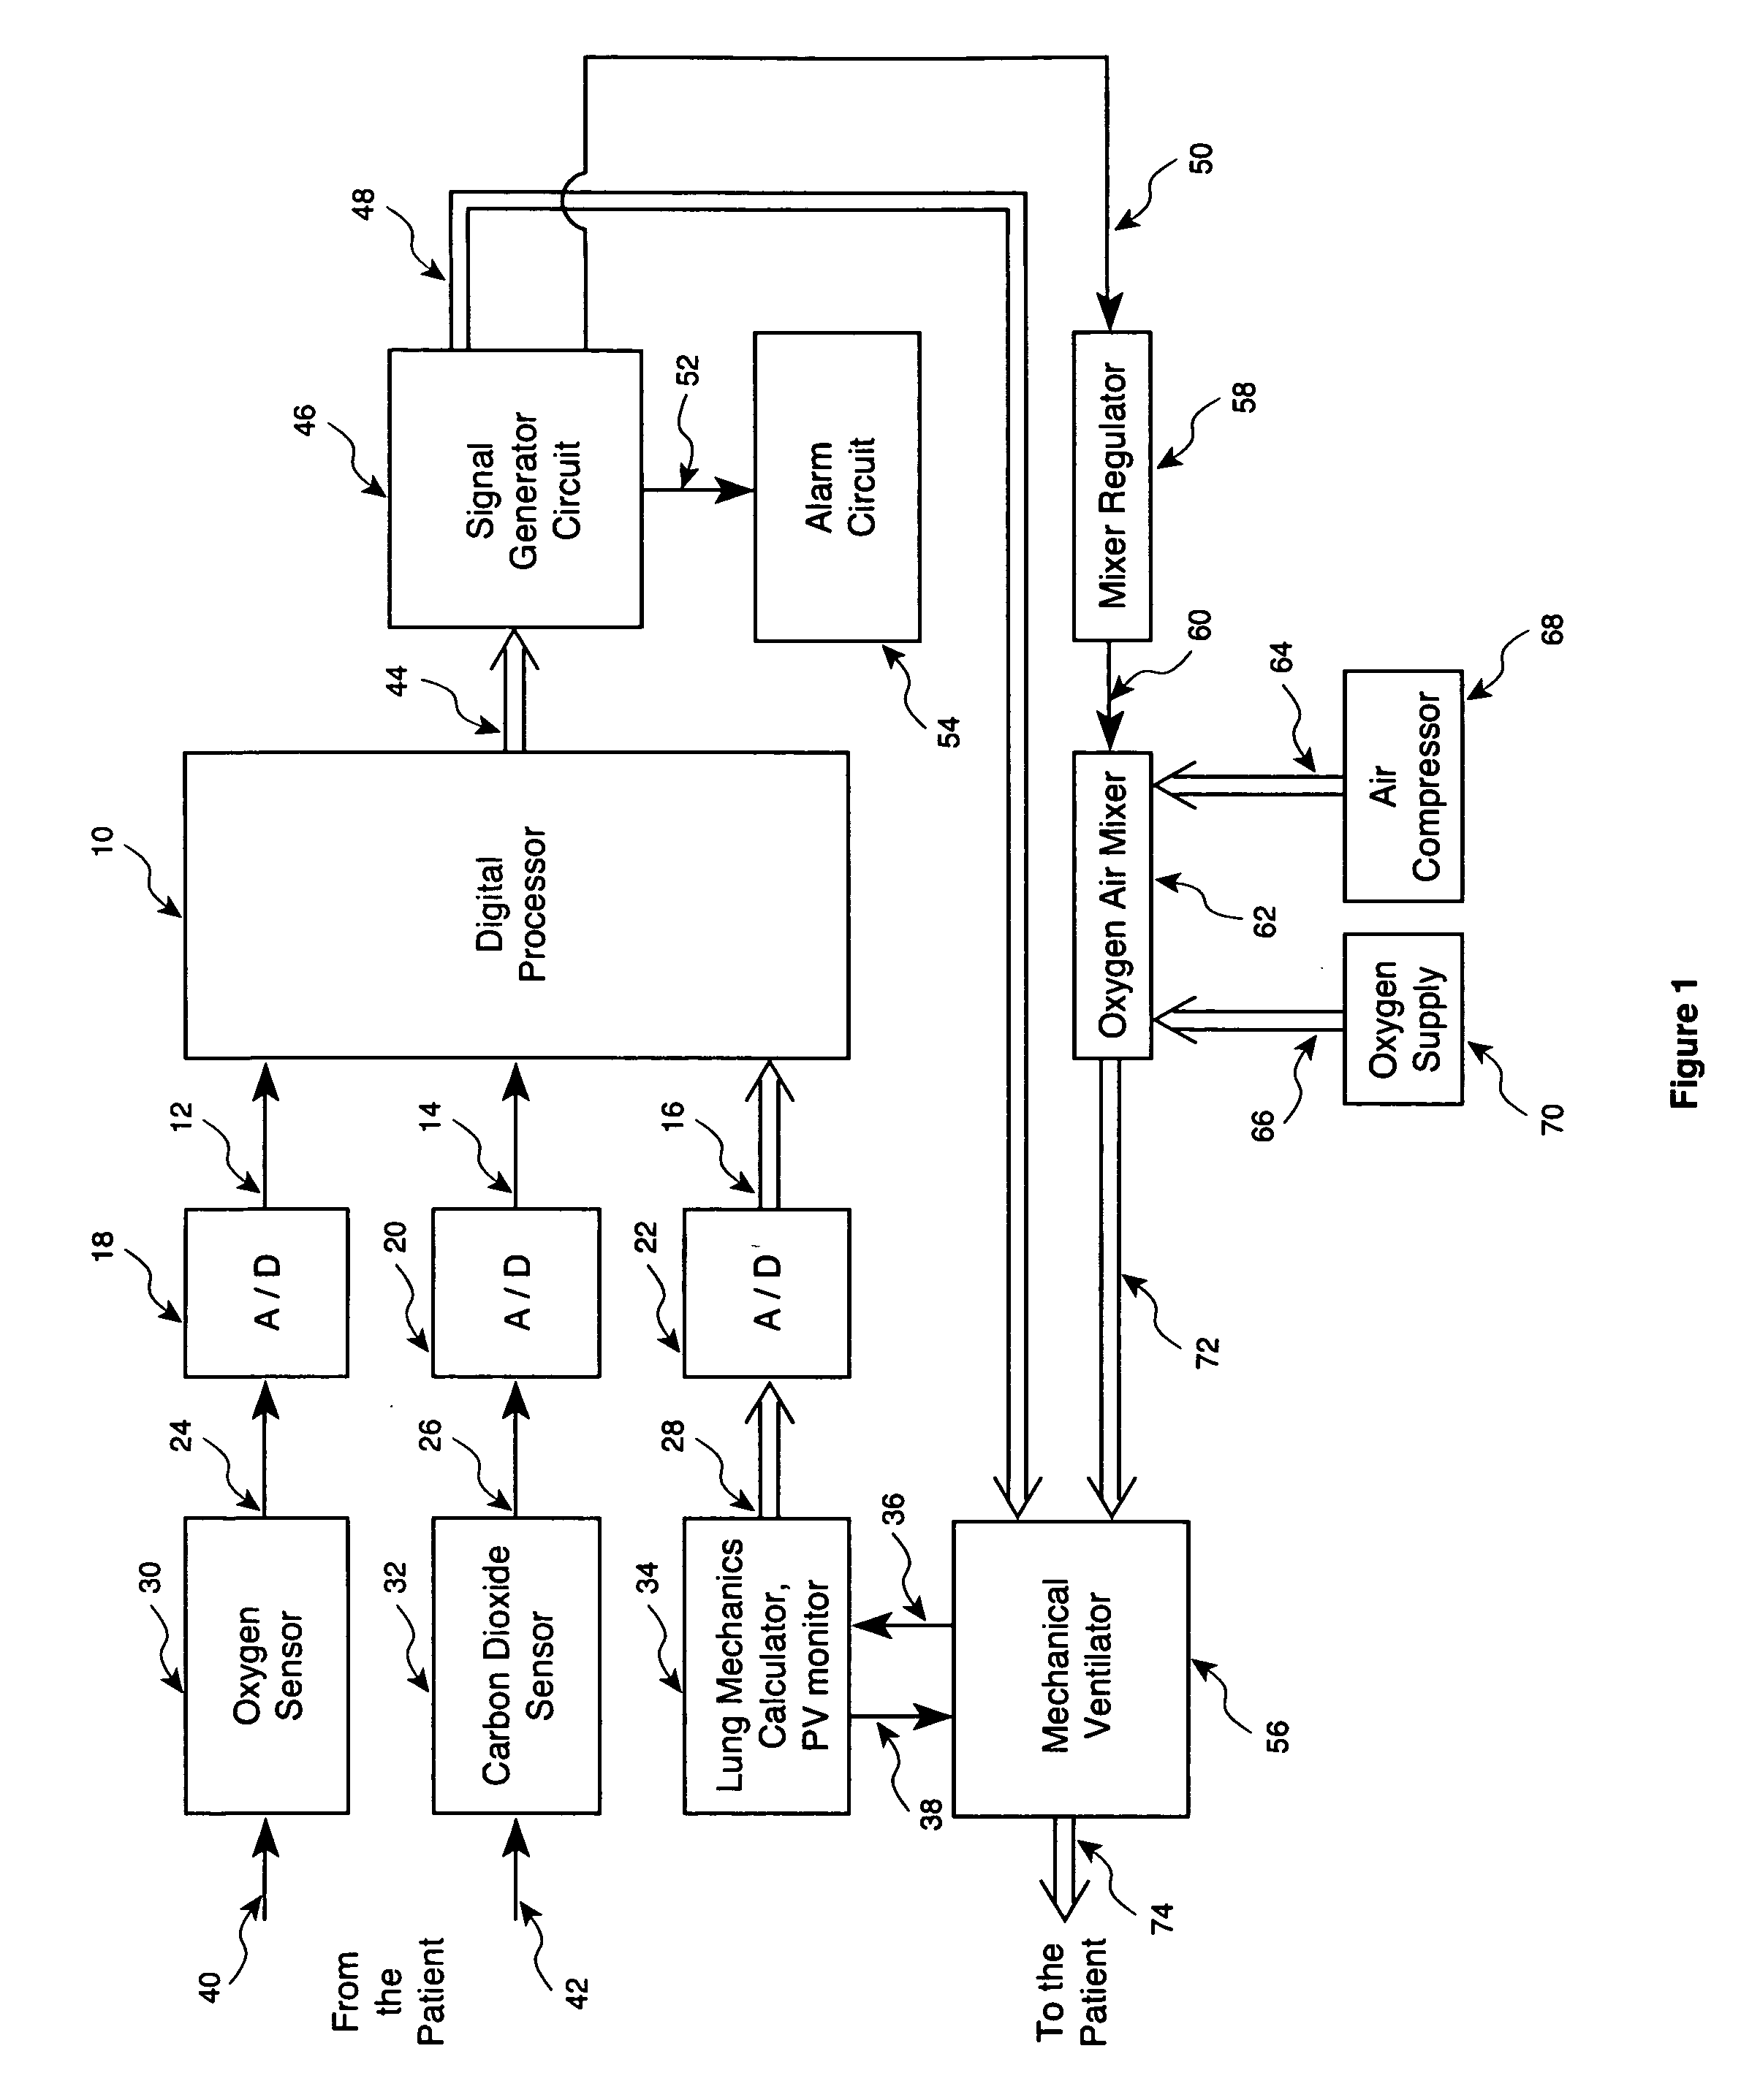 Method and apparatus for controlling a ventilator